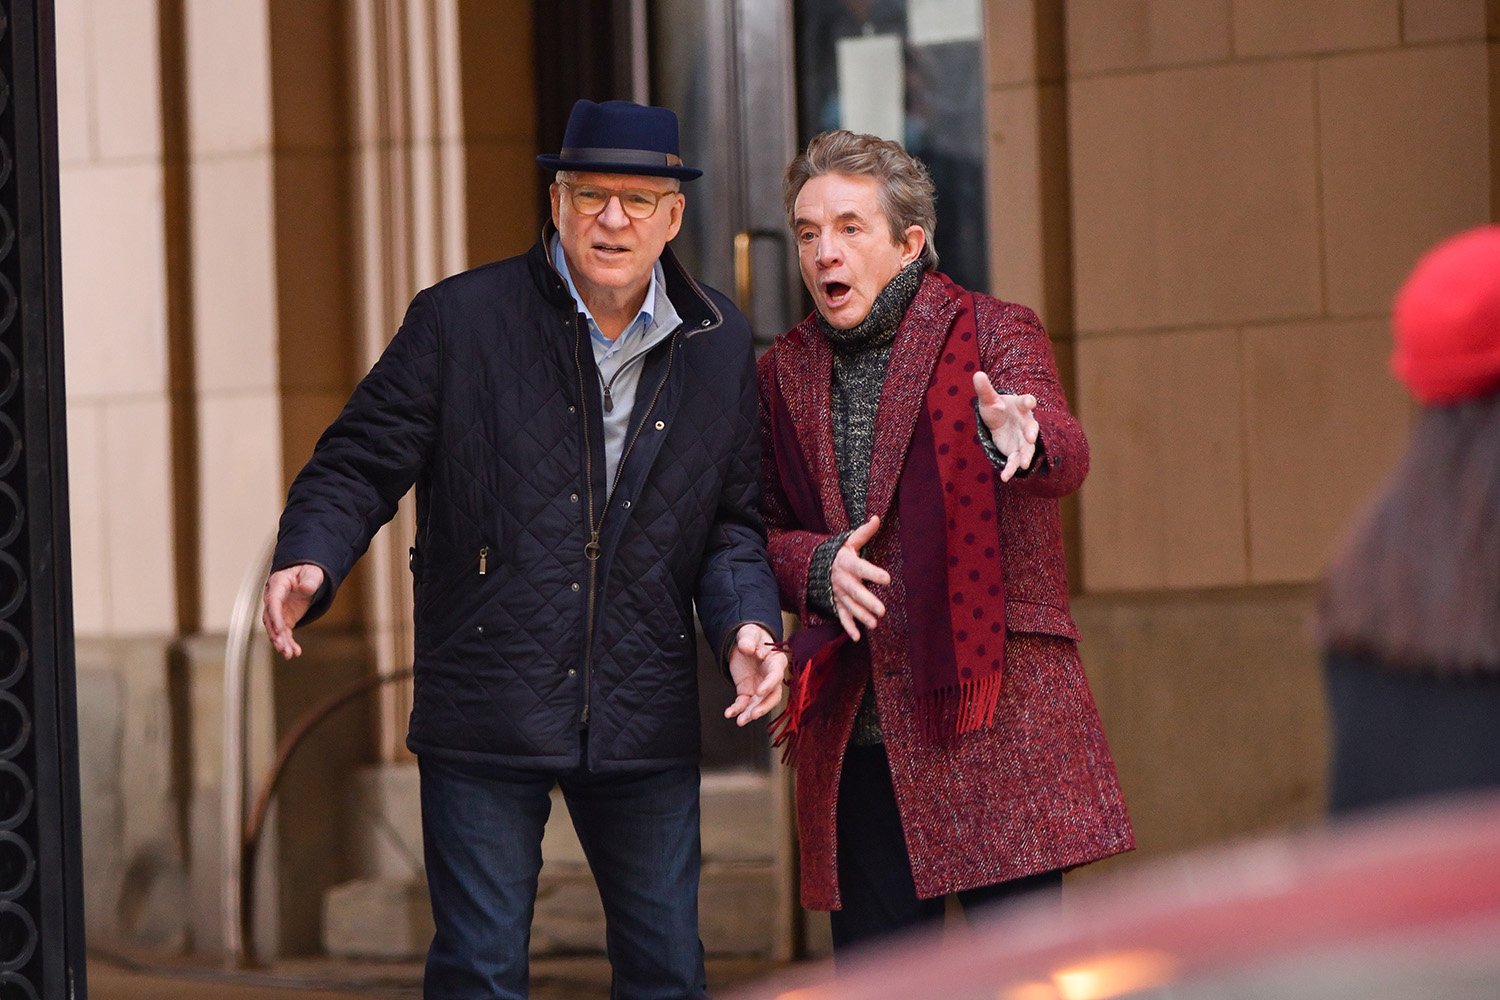 Steve Martin and Martin Short stand outside a building in New York